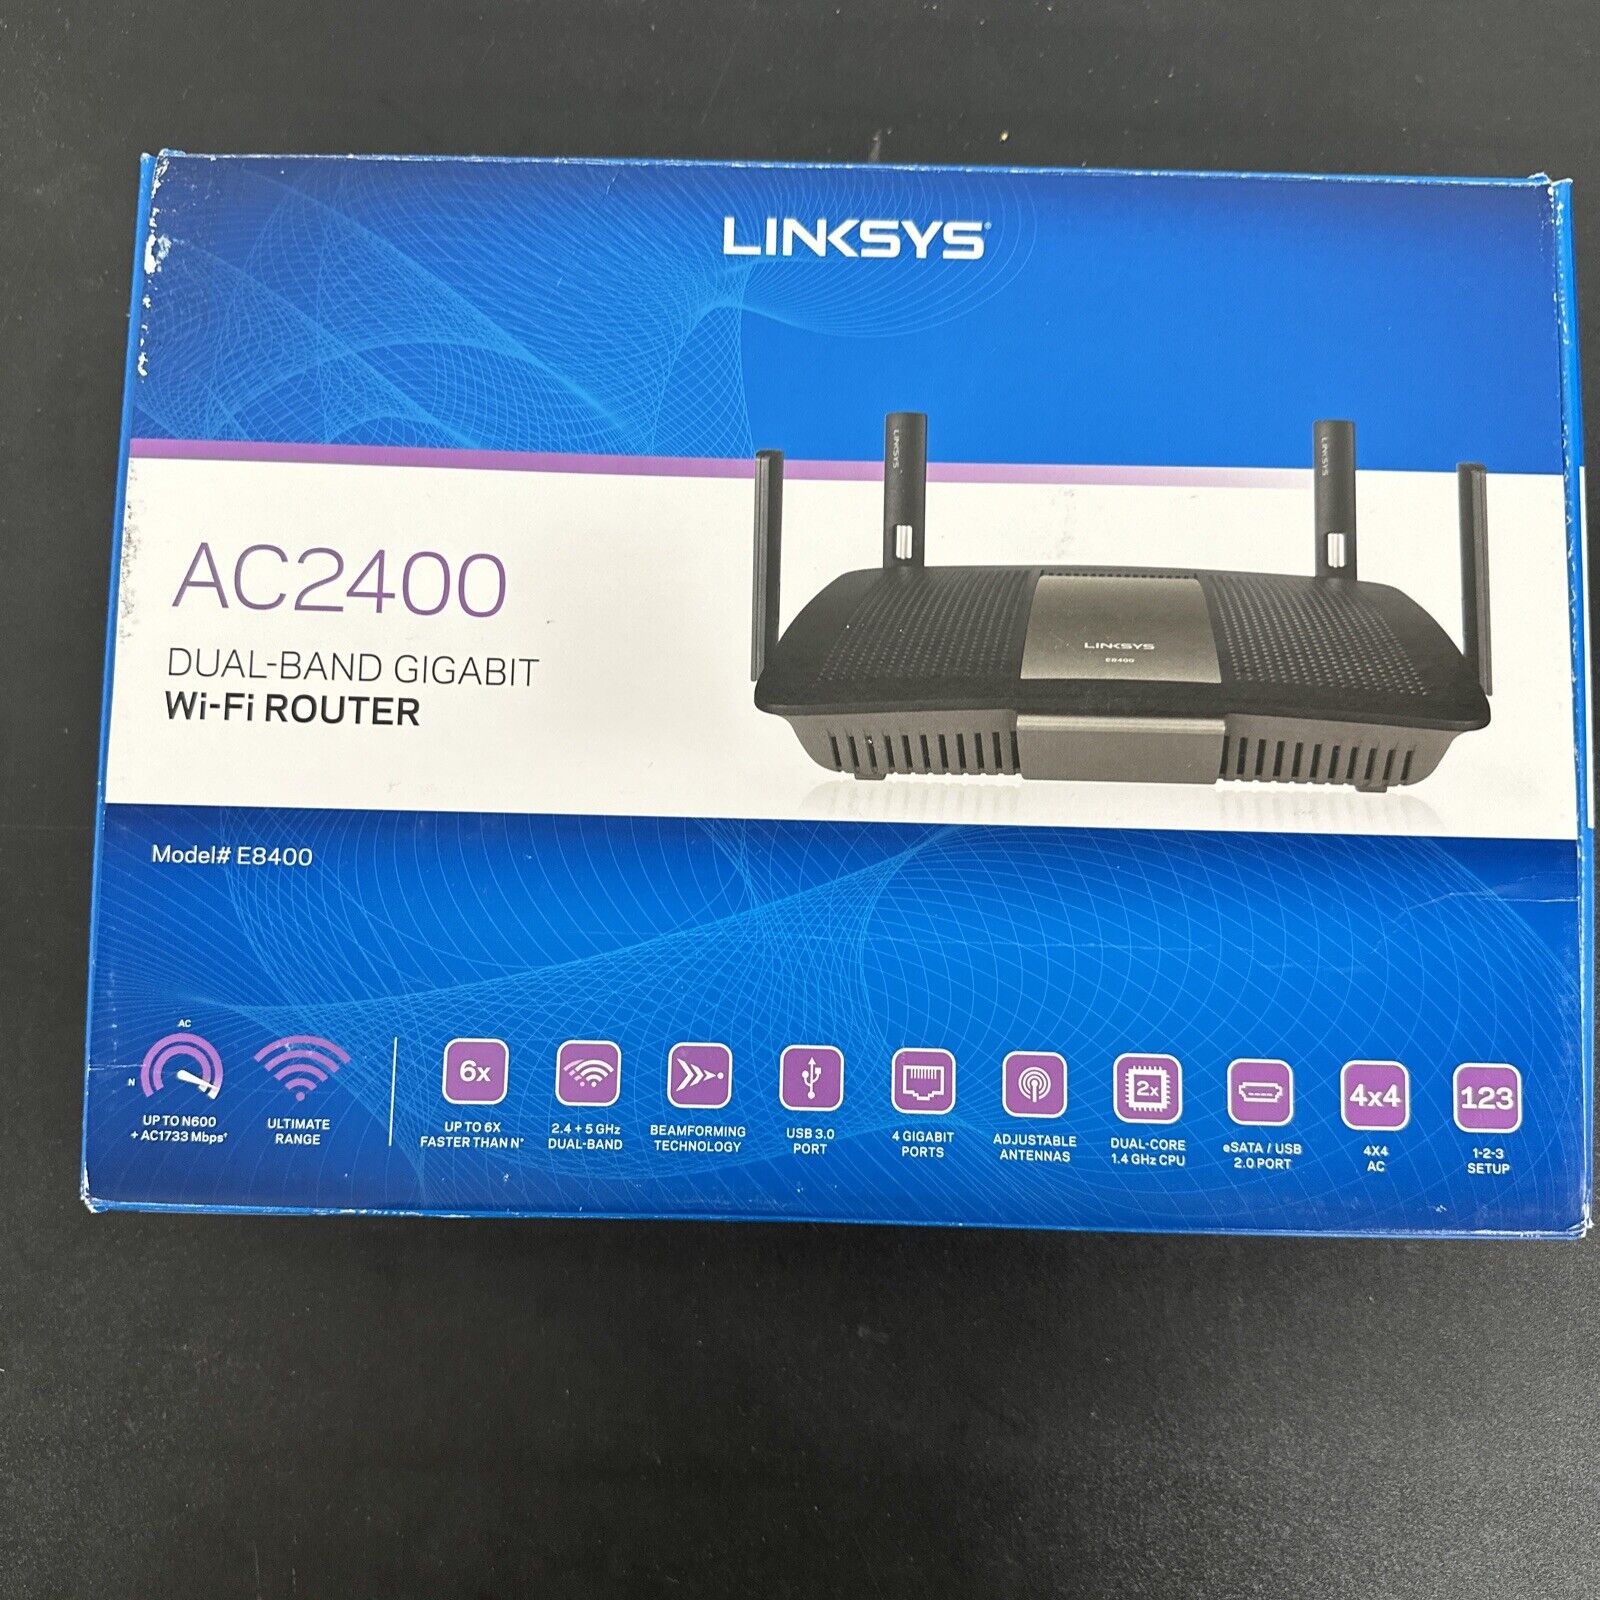 Linksys E8400 AC2400 Dual-Band WiFi Router 1733 Mbps  